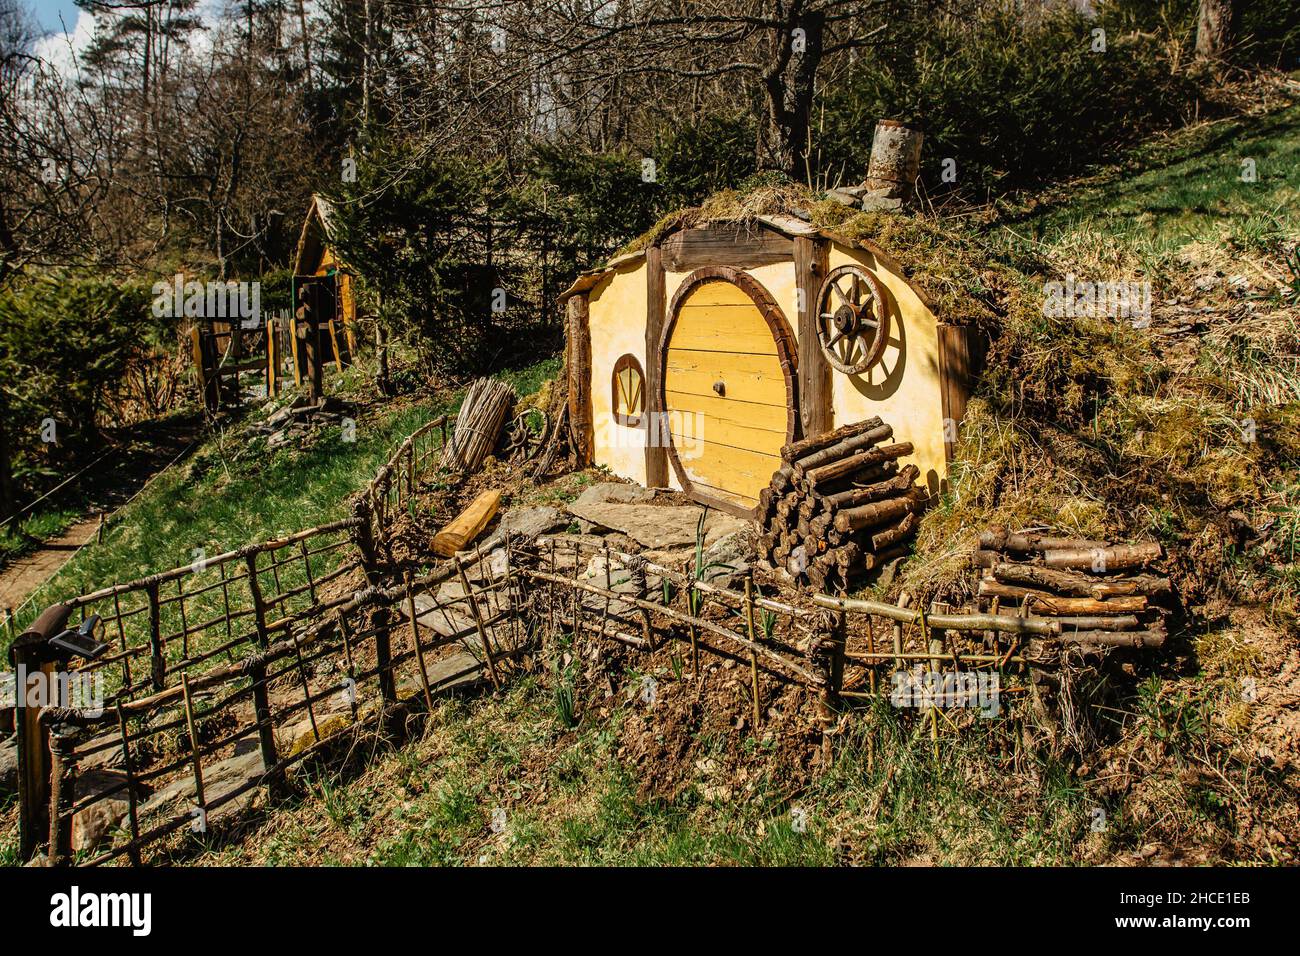 Hobbit house in Czech Hobbiton with three Hobbit holes and cute yellow doors.Fairy tale home in garden.Magic small village from fantasy movie Stock Photo